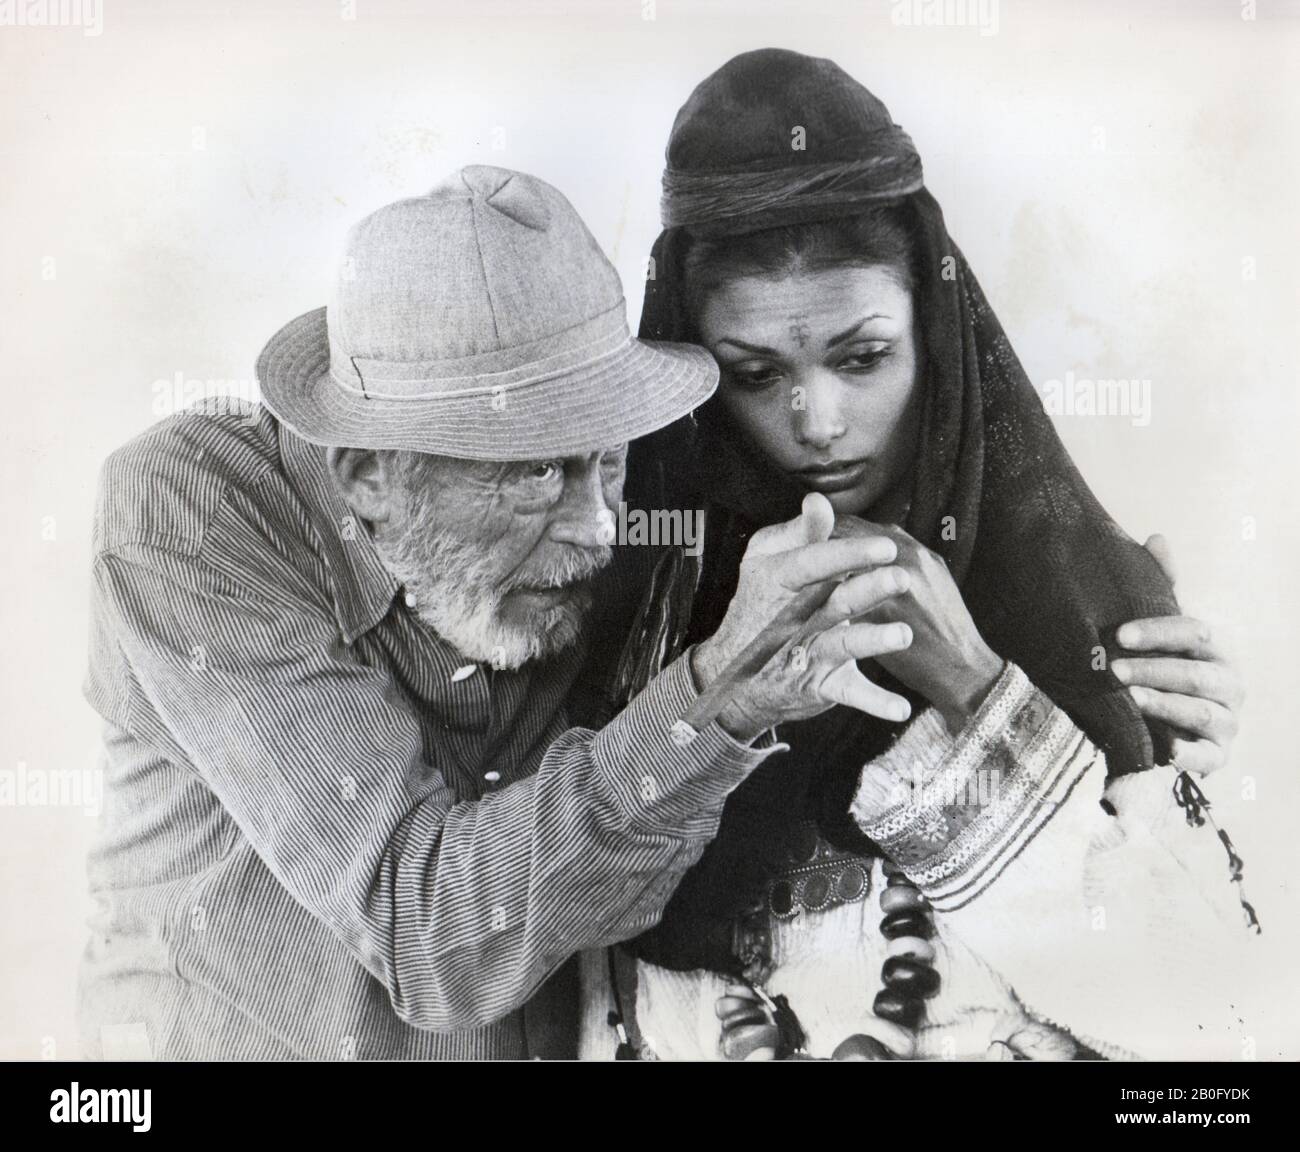 JOHN HUSTON AUF SET VON "THE MAN WHO WOULD BE KING" (1975) SHAKIRA CAINE COLUMBIA PICTURES/MOVIESTORE COLLECTION LTD Stockfoto